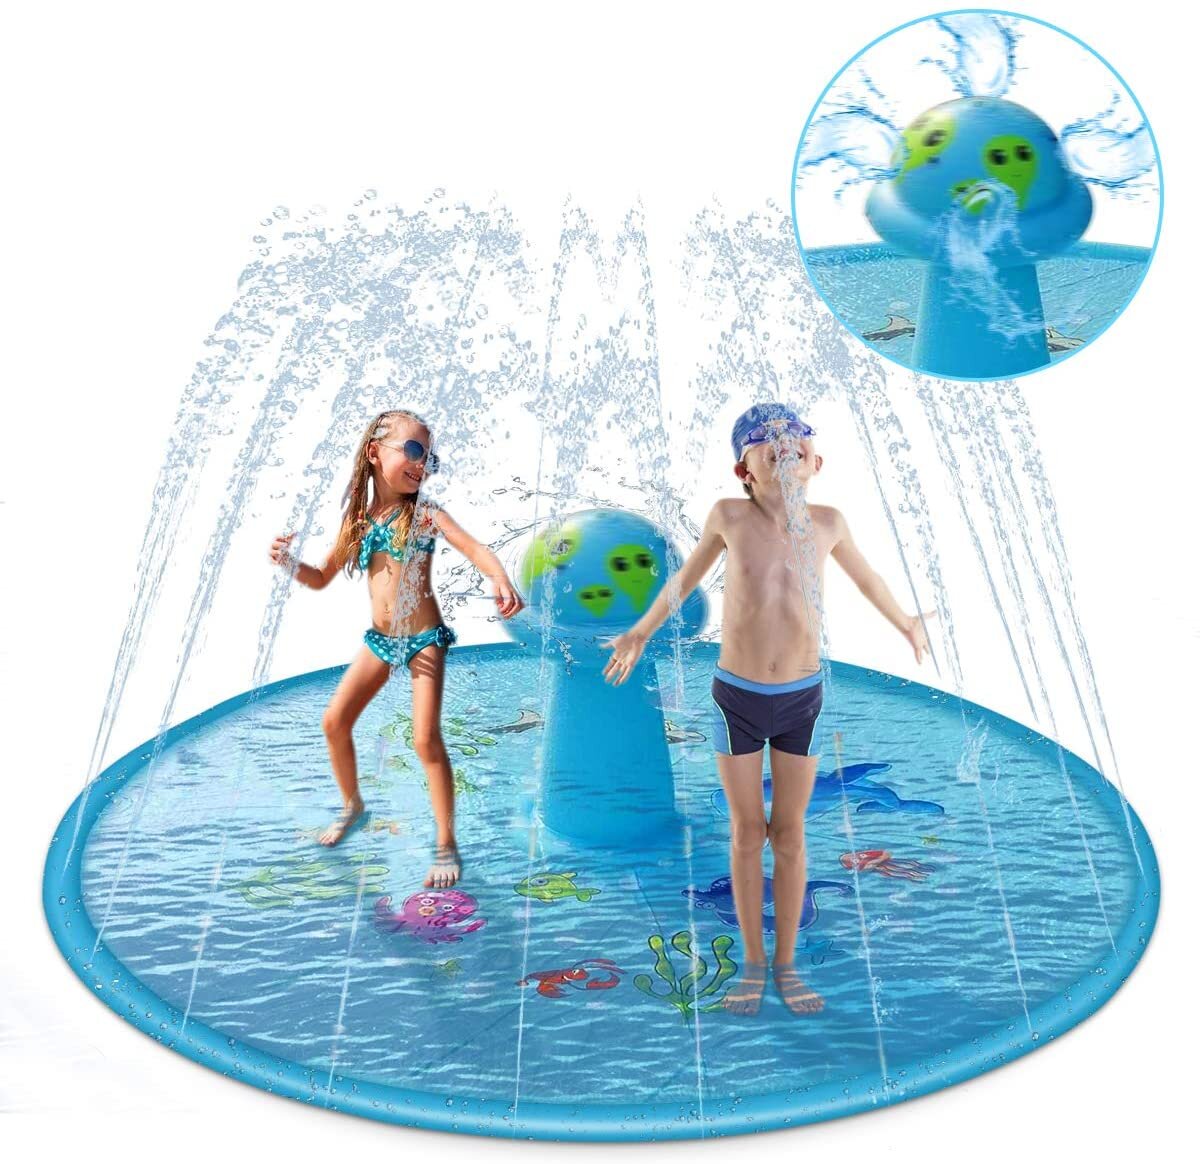  Water Play at Home on Hello Rascal Kids. Splash pad at home. 